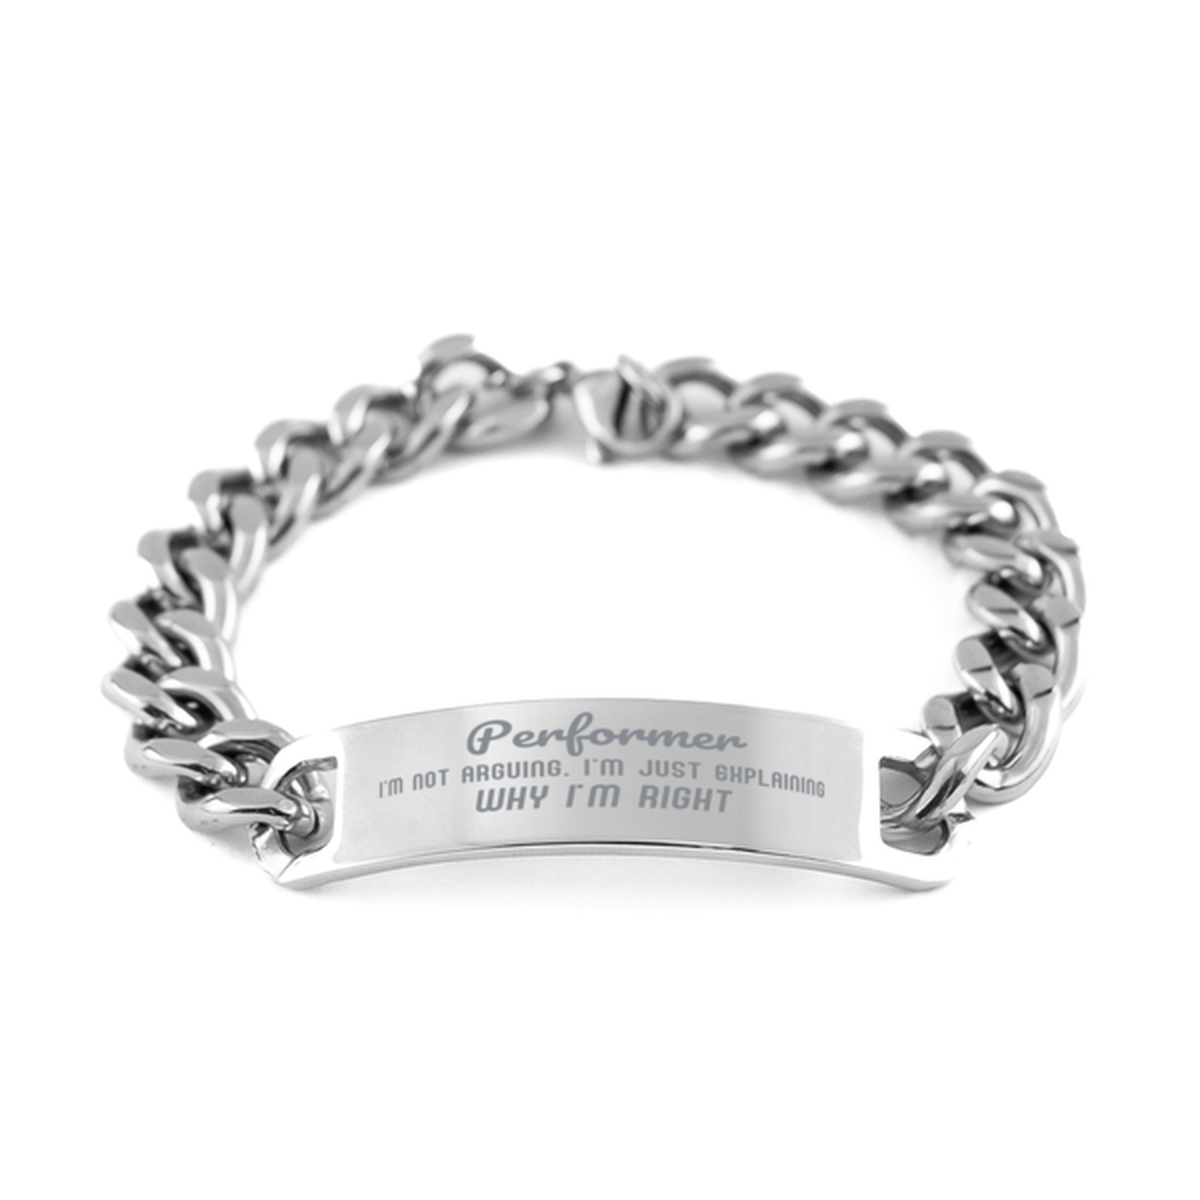 Performer I'm not Arguing. I'm Just Explaining Why I'm RIGHT Cuban Chain Stainless Steel Bracelet, Graduation Birthday Christmas Performer Gifts For Performer Funny Saying Quote Present for Men Women Coworker